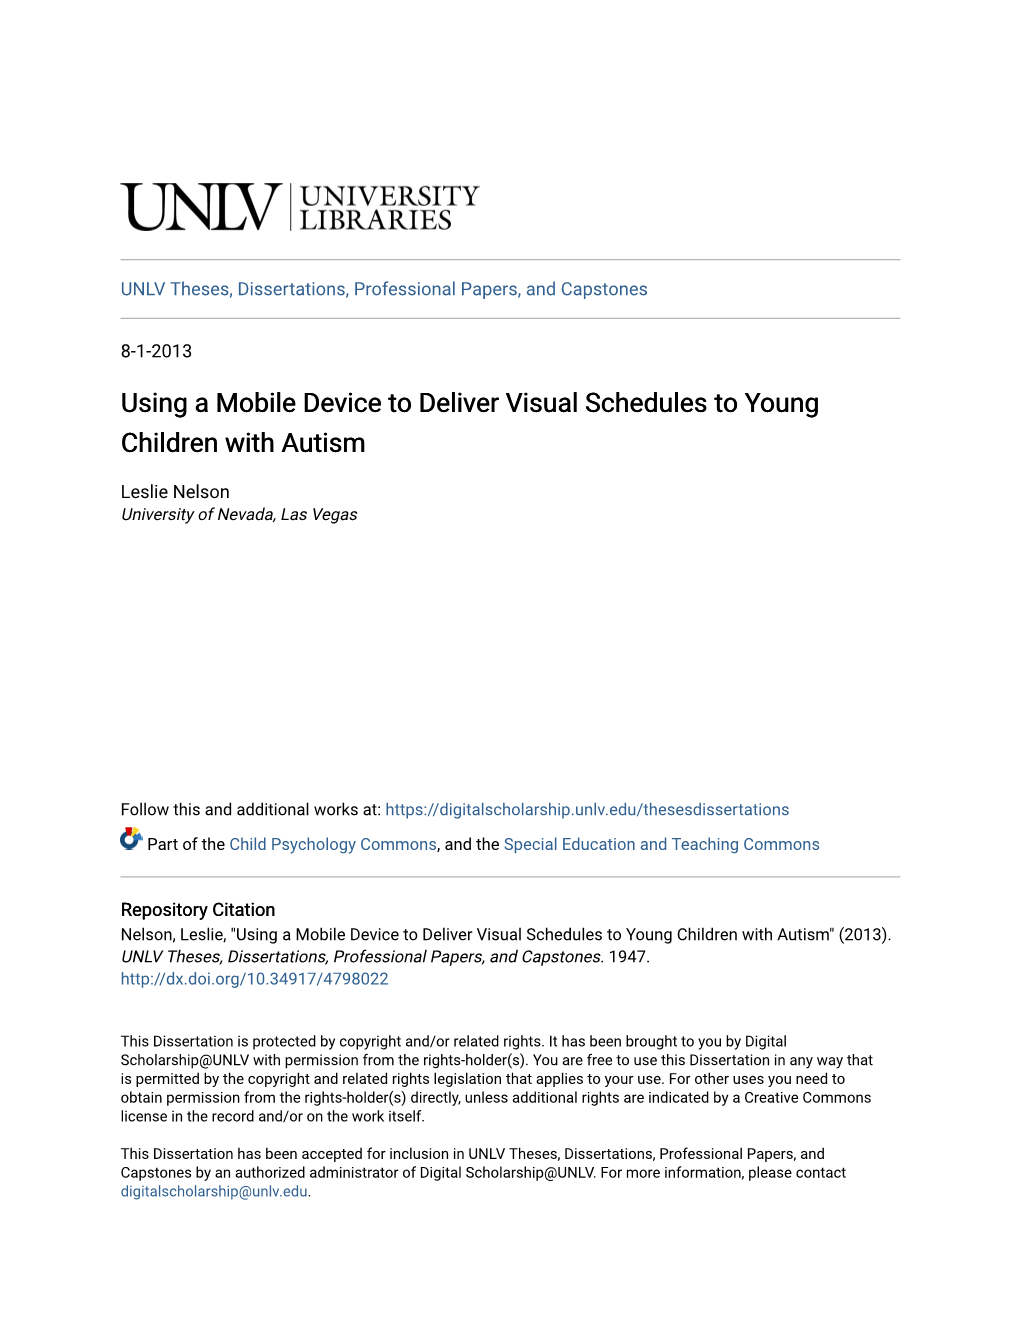 Using a Mobile Device to Deliver Visual Schedules to Young Children with Autism